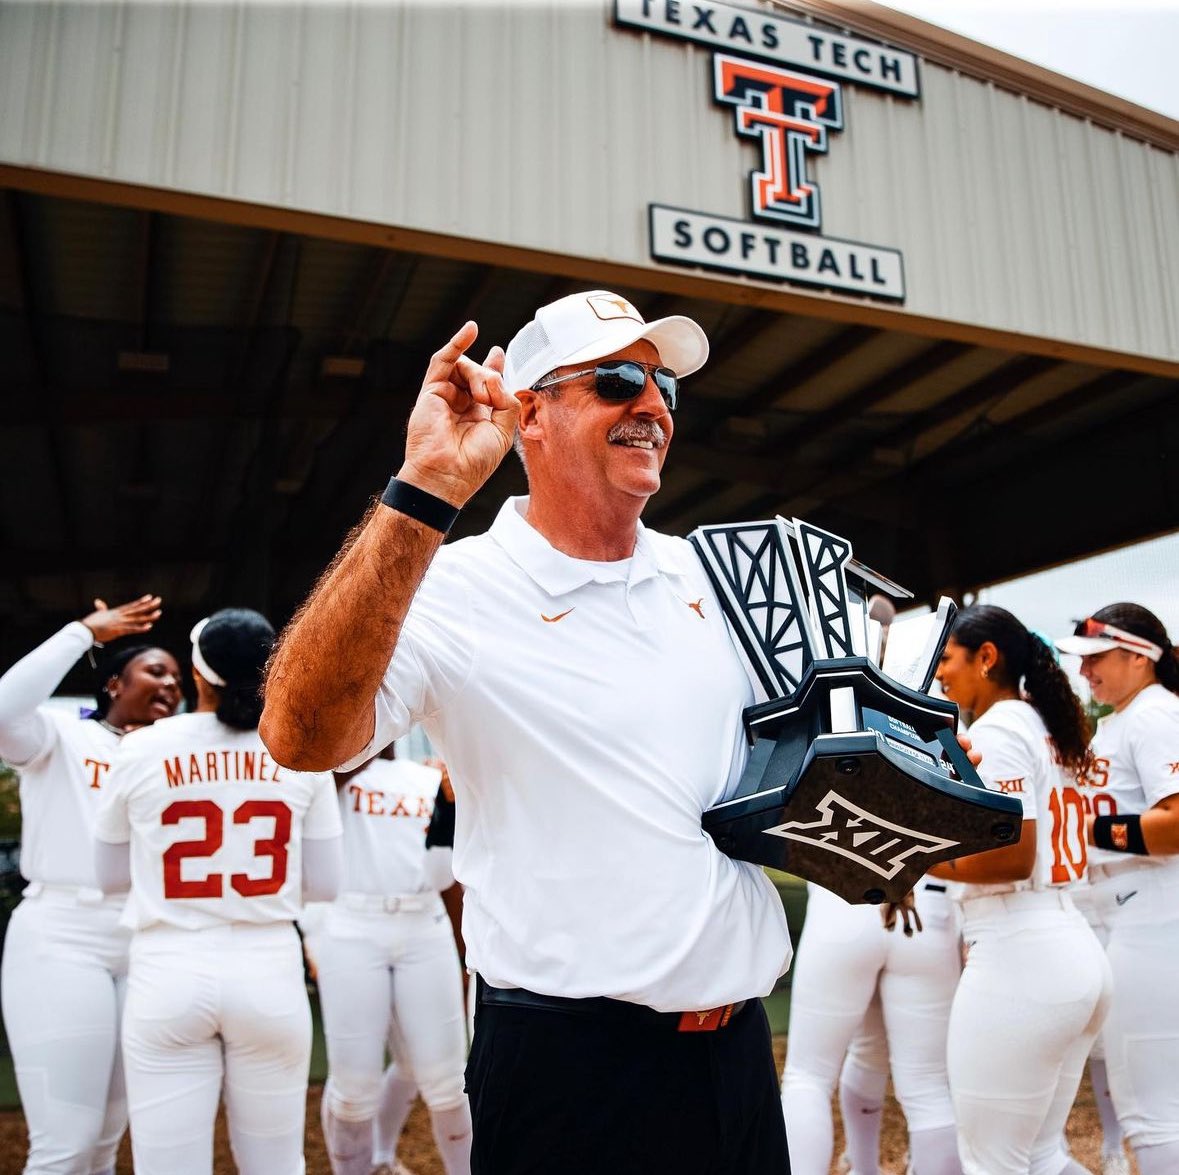 @TexasSoftball in a 3 game series against Texas Tech outscored them 50-7 (13-3, 23-0, 14-4) absolutely domination by the Horns down in Lubbock. No doubt anyone else was winning the Big 12 this year! #HookEm #ThisisTexas #SoftballSchool 🤘🏻🤠